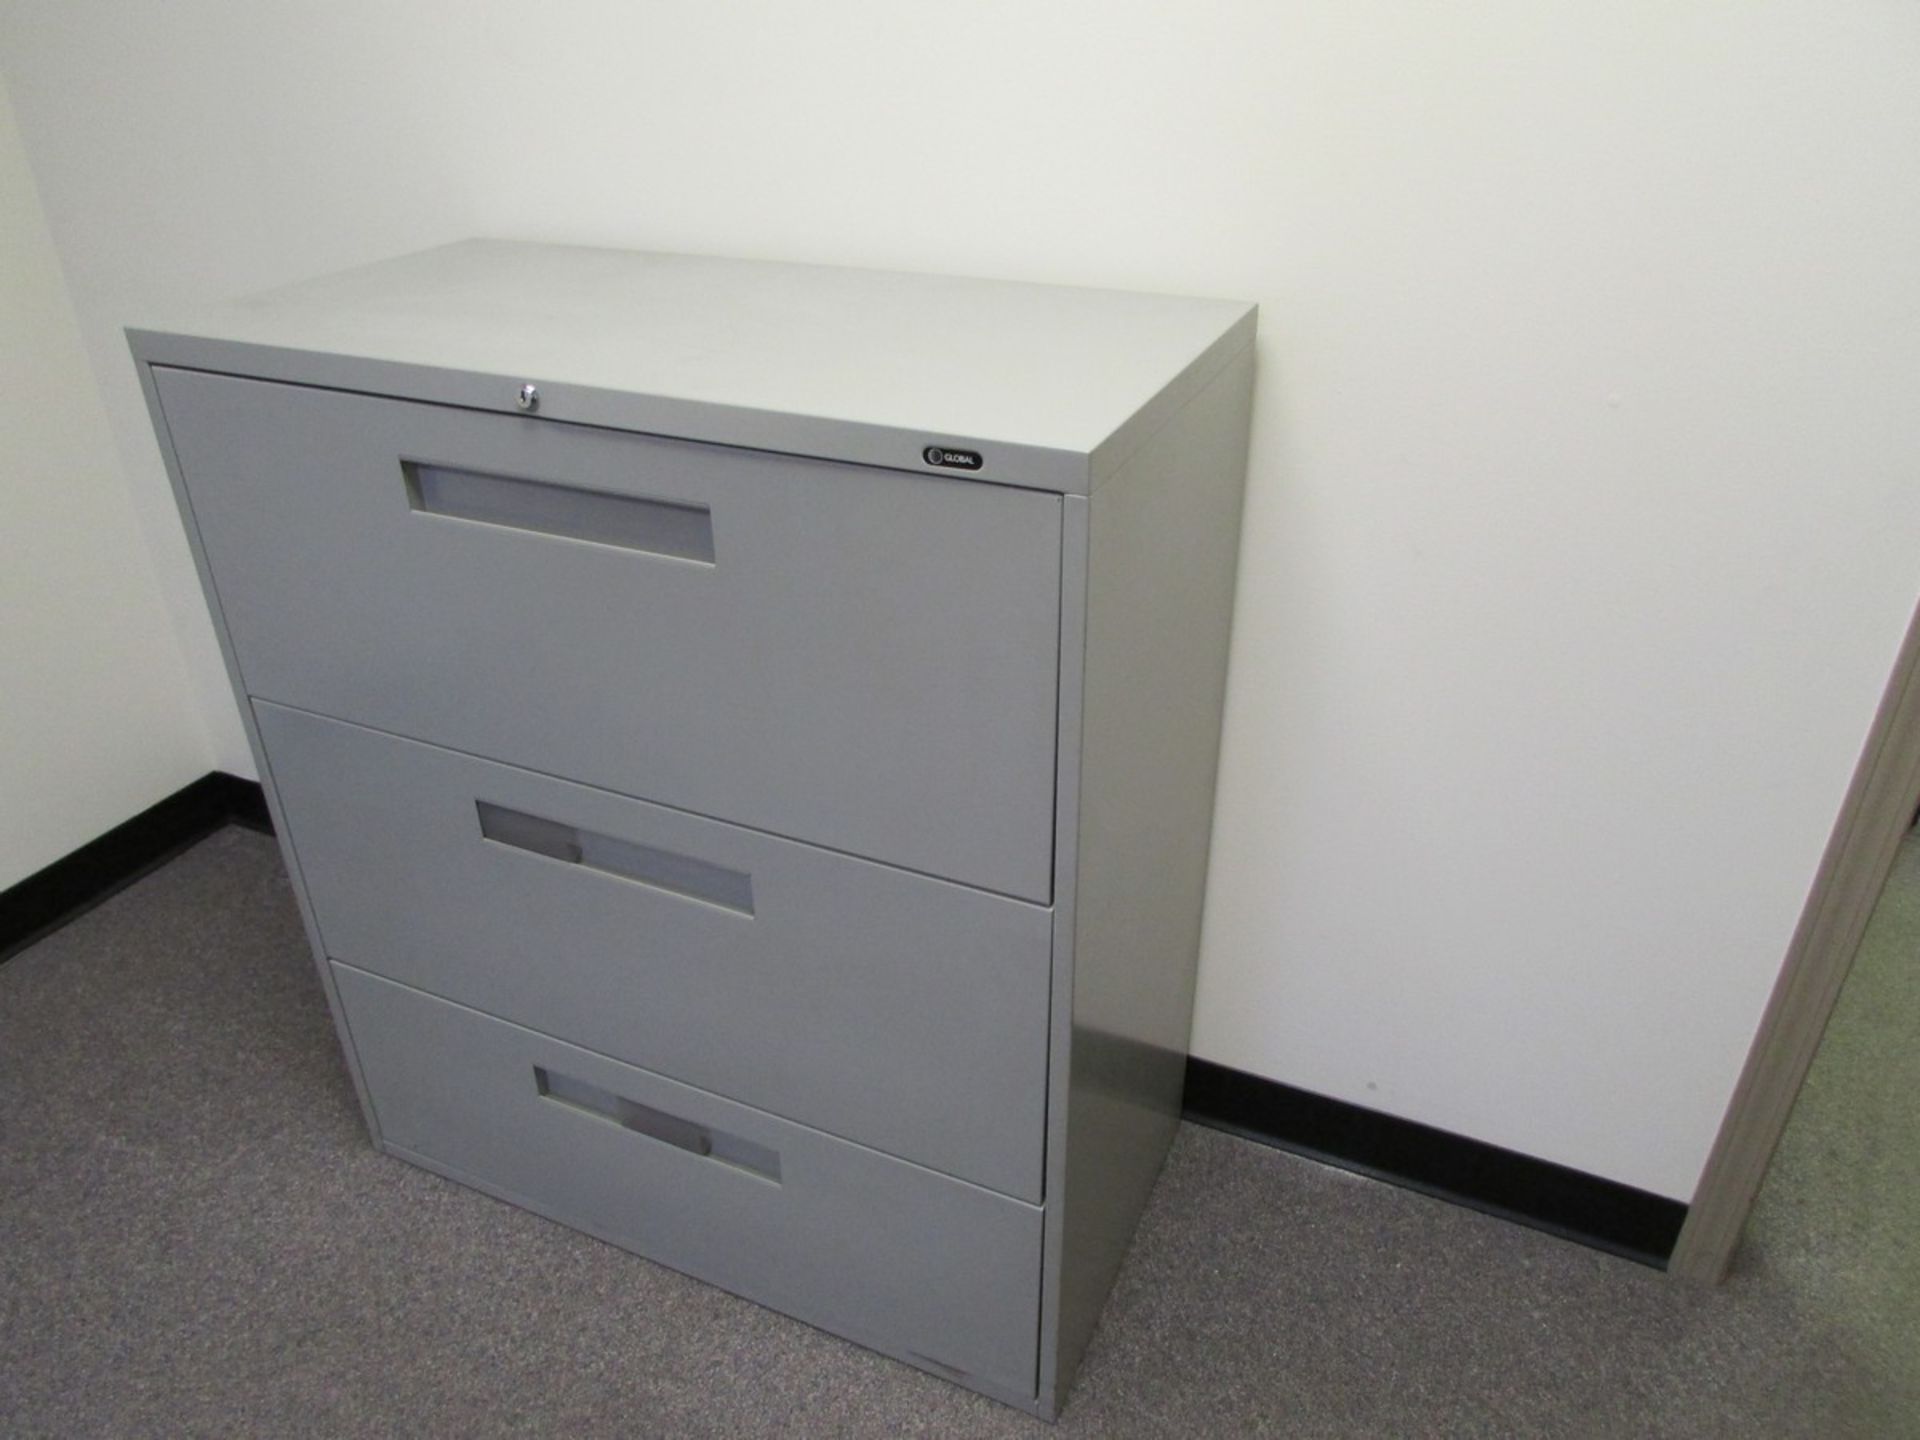 Contents of office includes, OKI printer, 2 filing cabinets, and 2 matching cupboards - Image 5 of 5